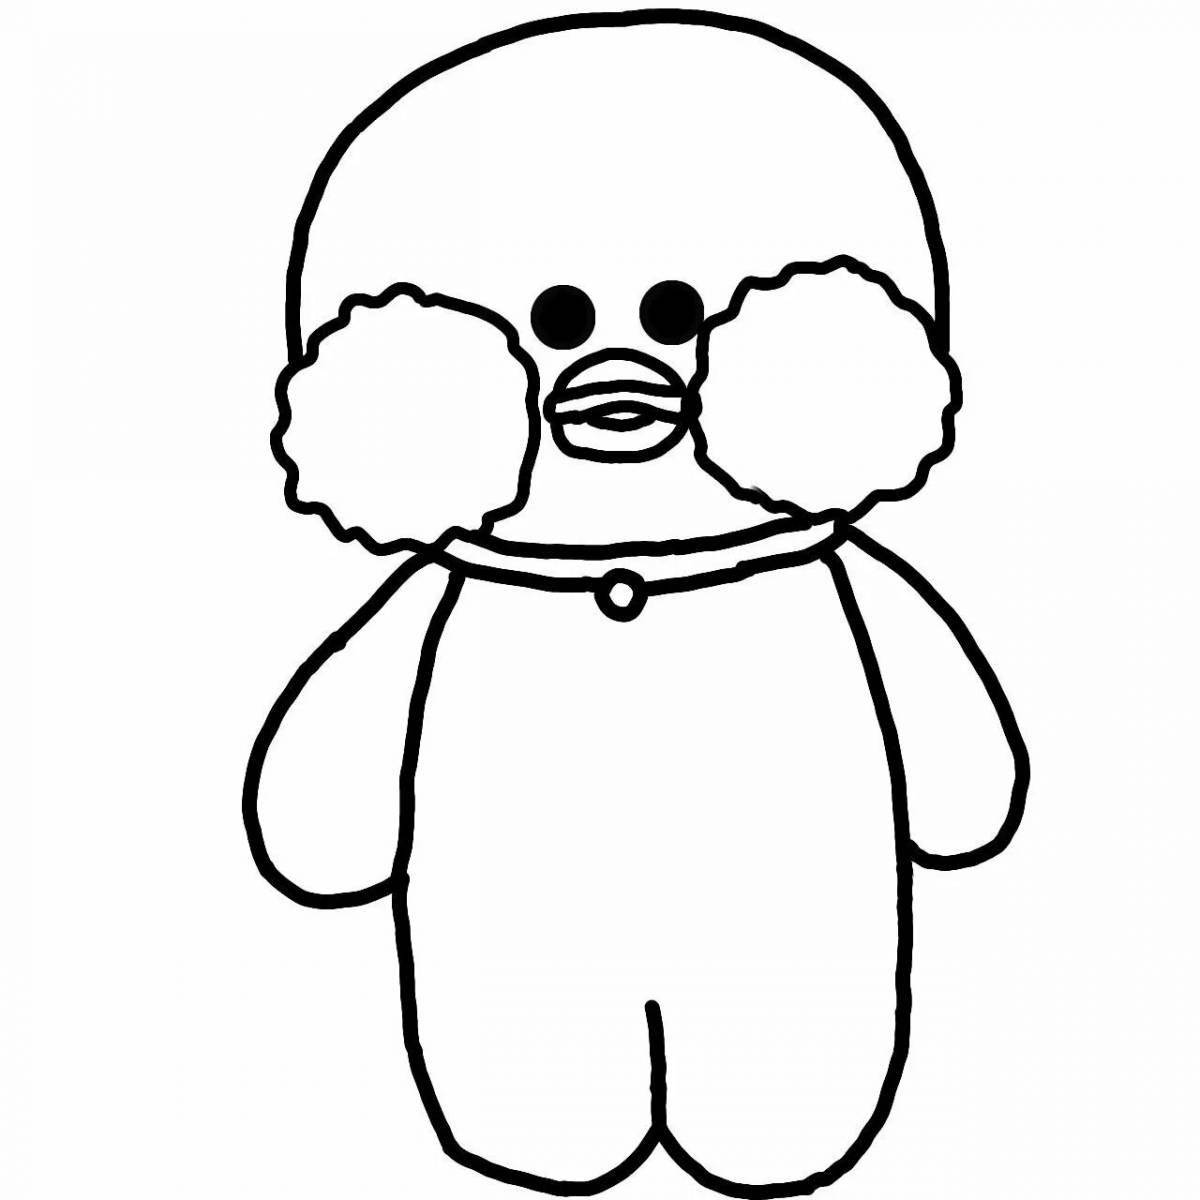 Lalafanfan duck coloring page